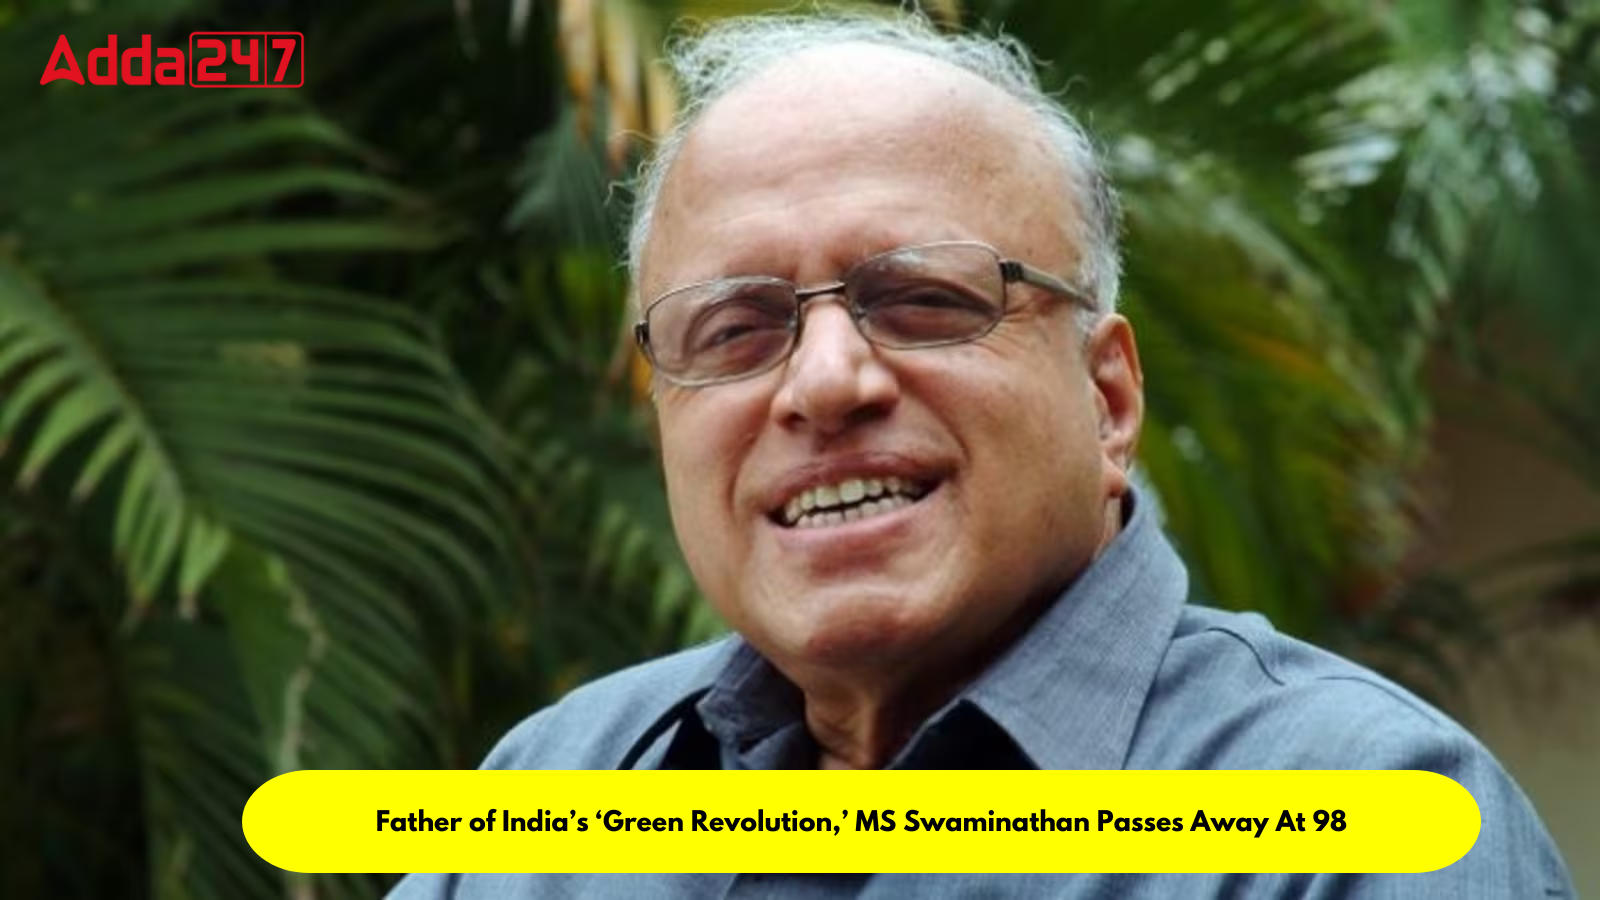 Father of India’s ‘Green Revolution,’ MS Swaminathan Passes Away At 98